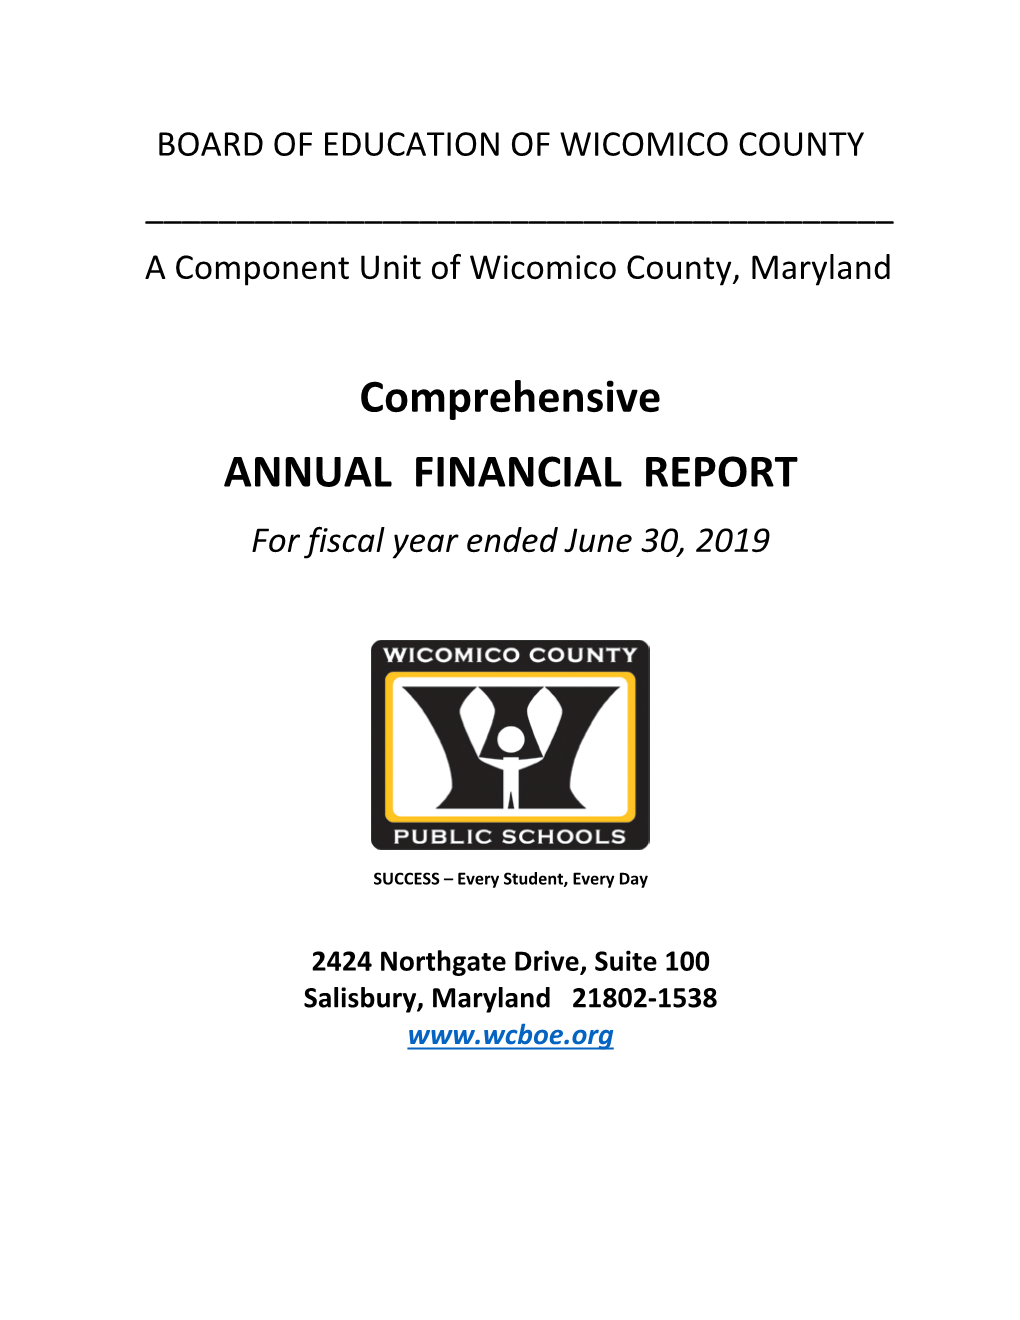 For Fiscal Year Ended June 30, 2019